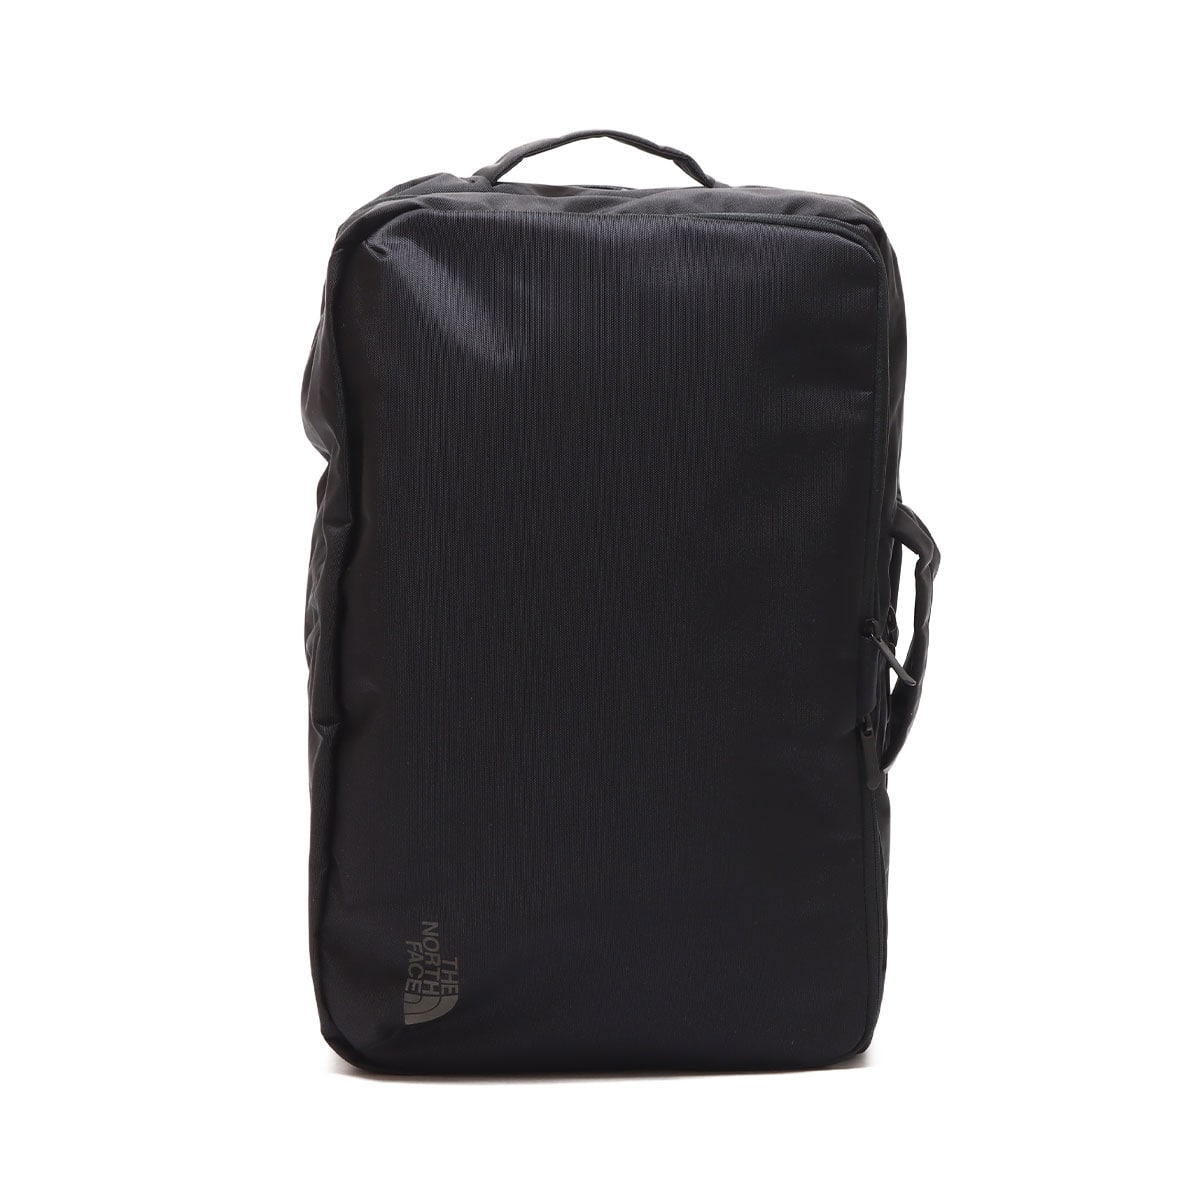 THE NORTH FACE SHUTTLE DUFFEL BLACK SS I